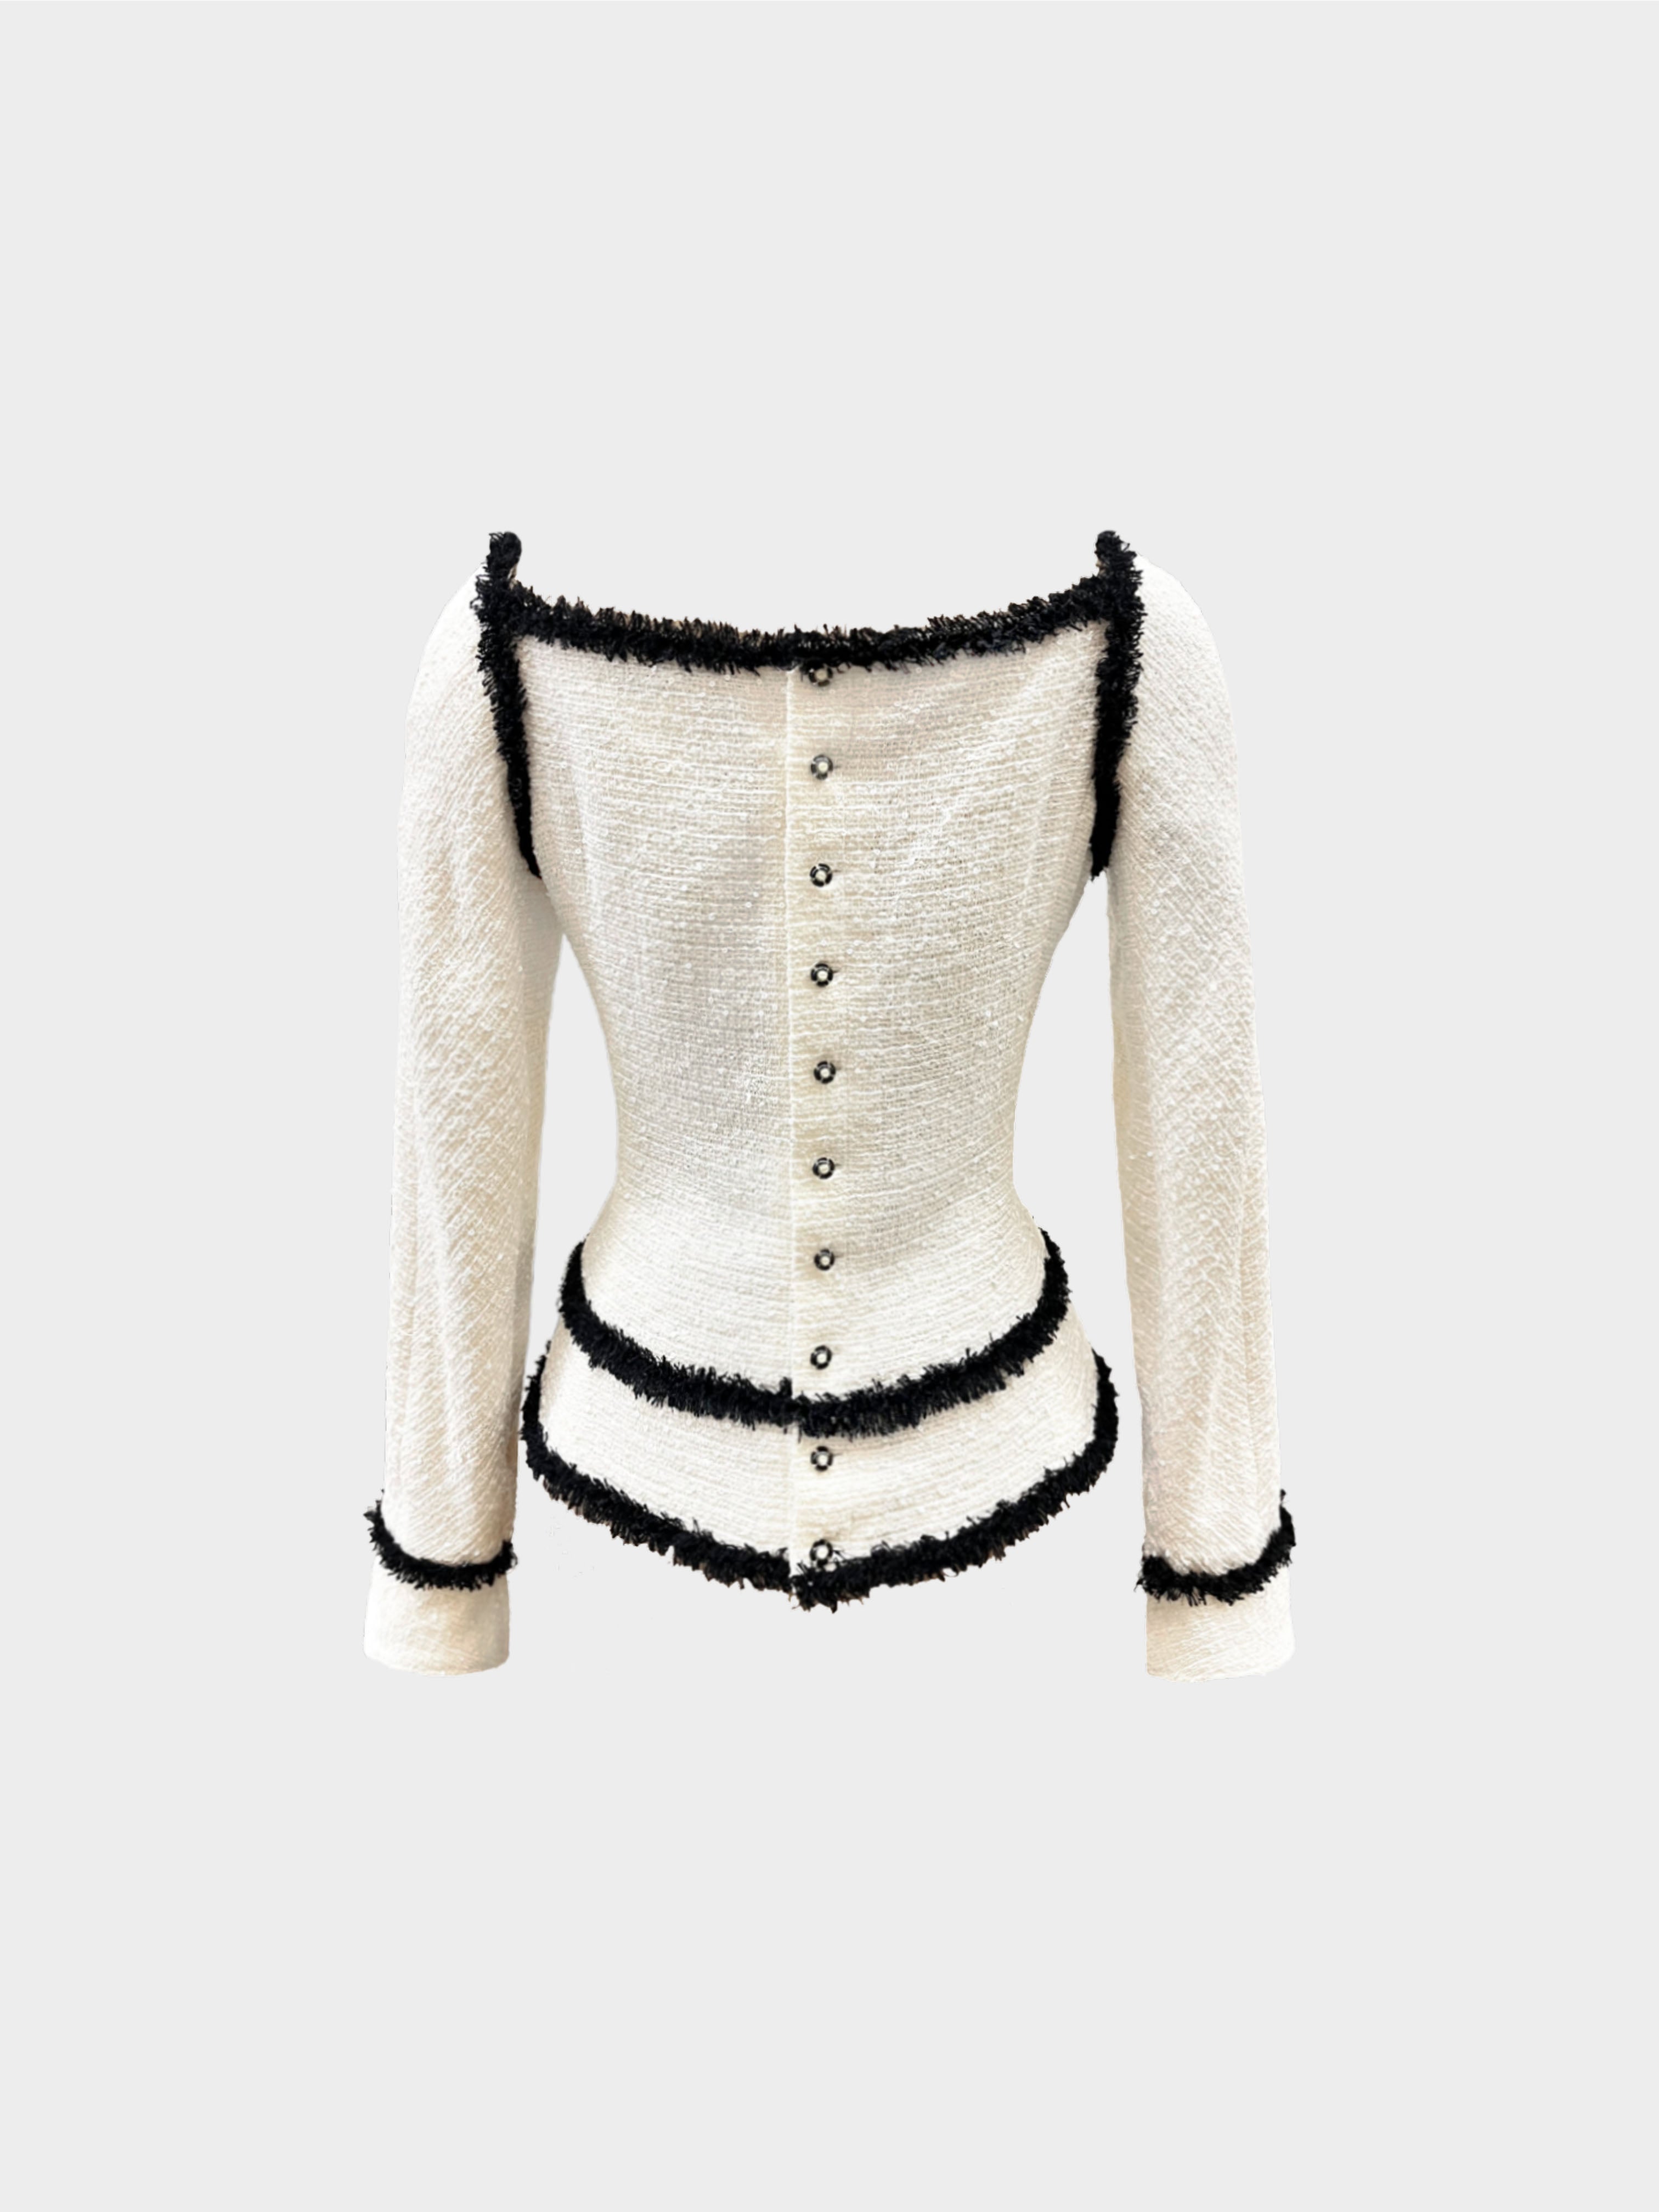 Chanel Spring 2004 Ivory Sequins Top with Black Trim